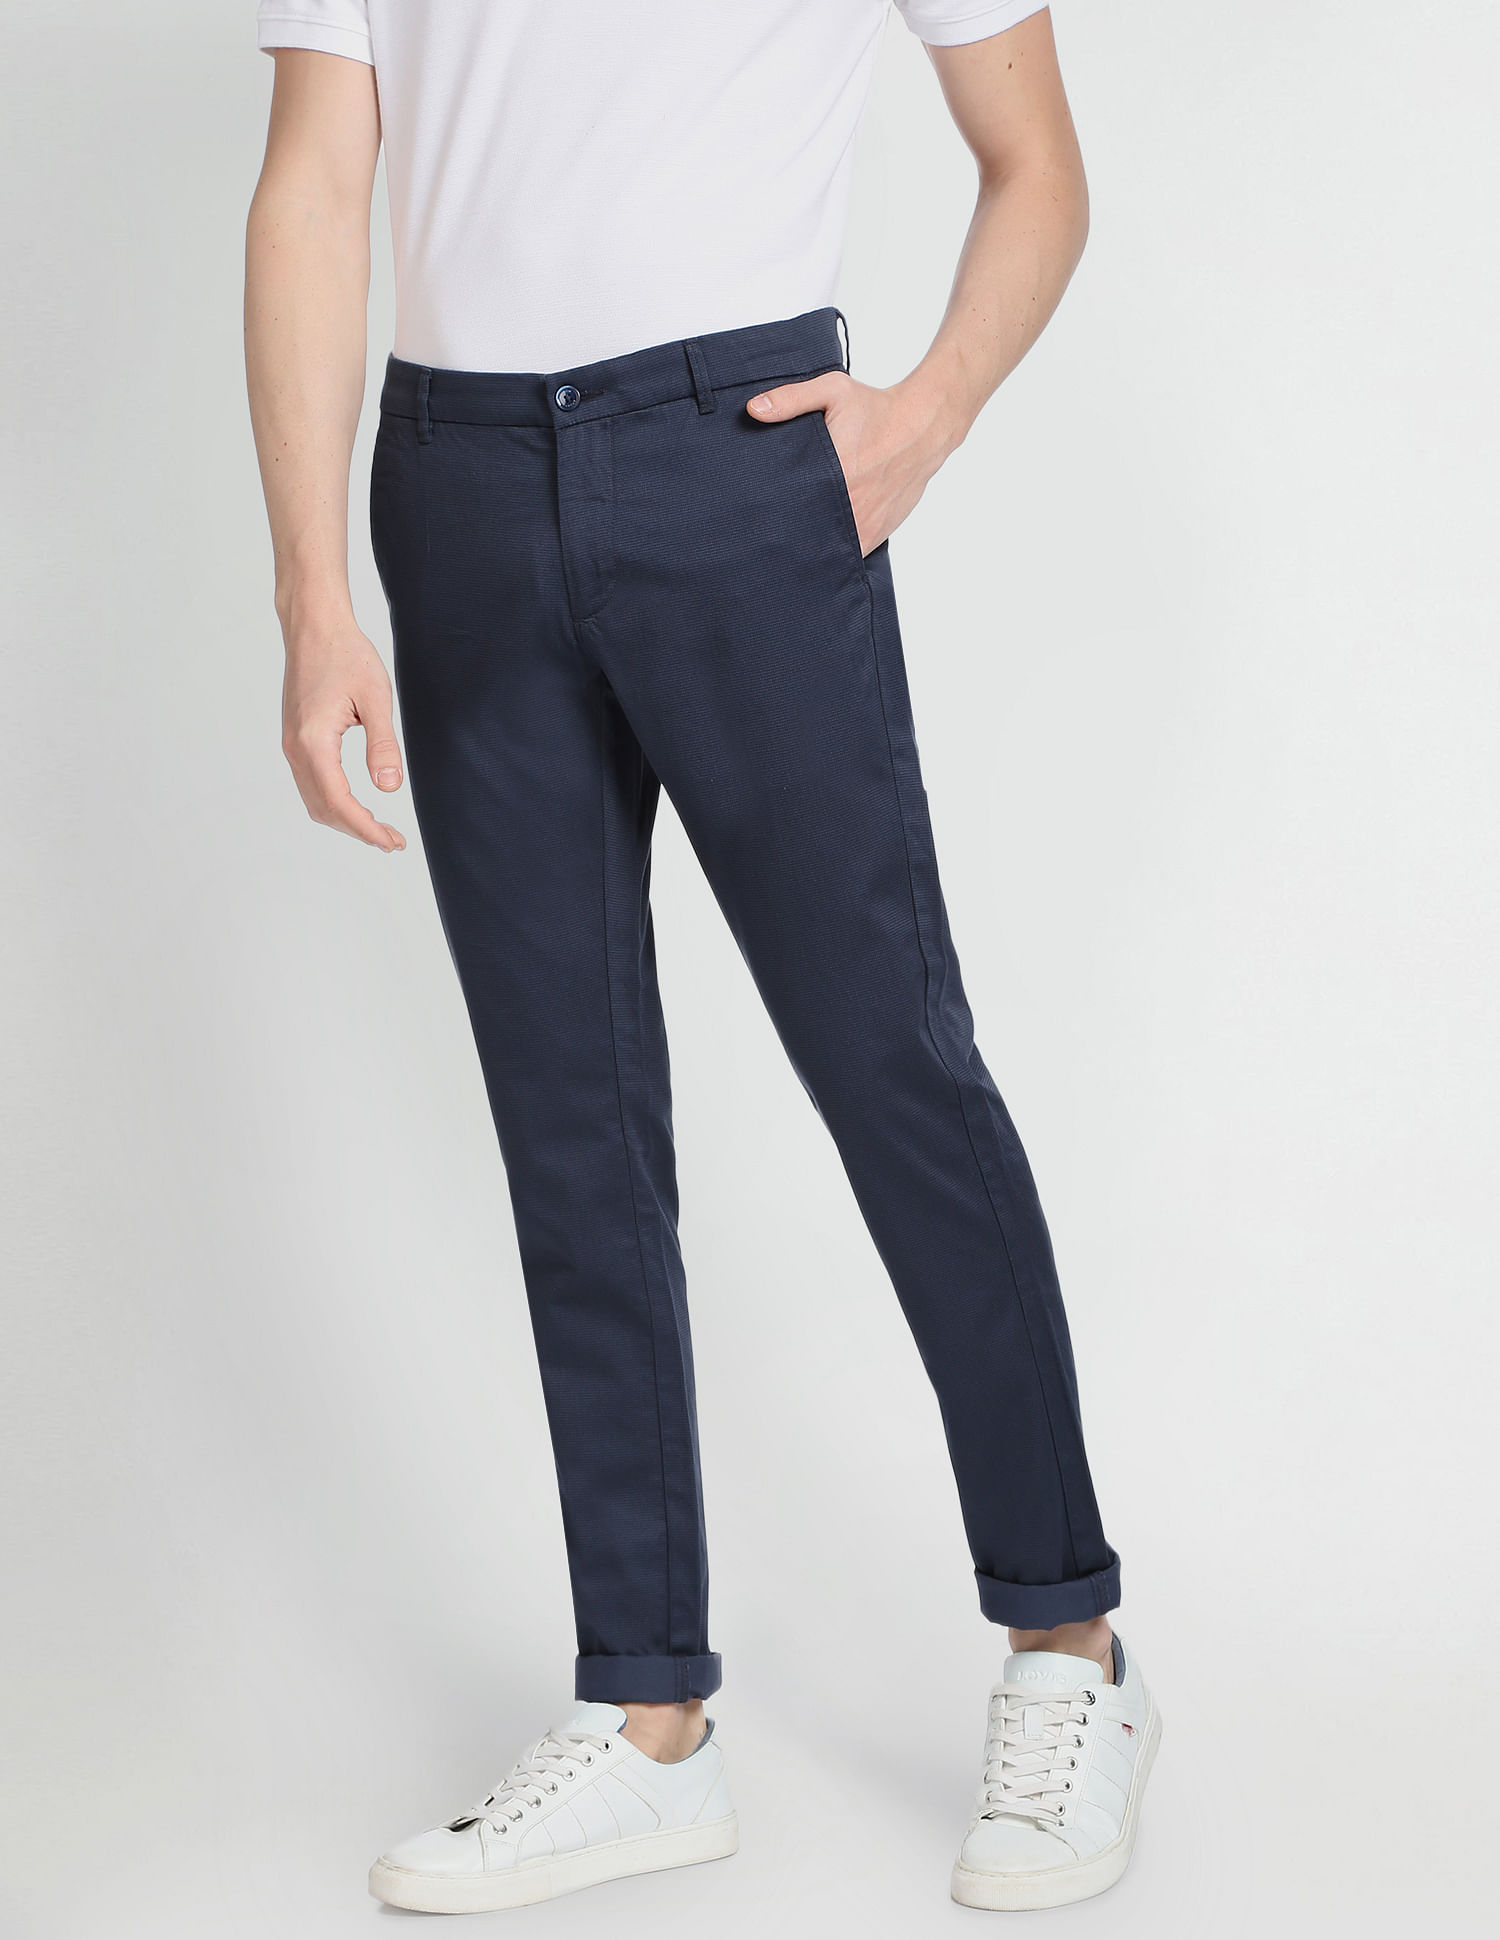 Womens Checked Trousers  Smart  Casual Check Trousers  Next